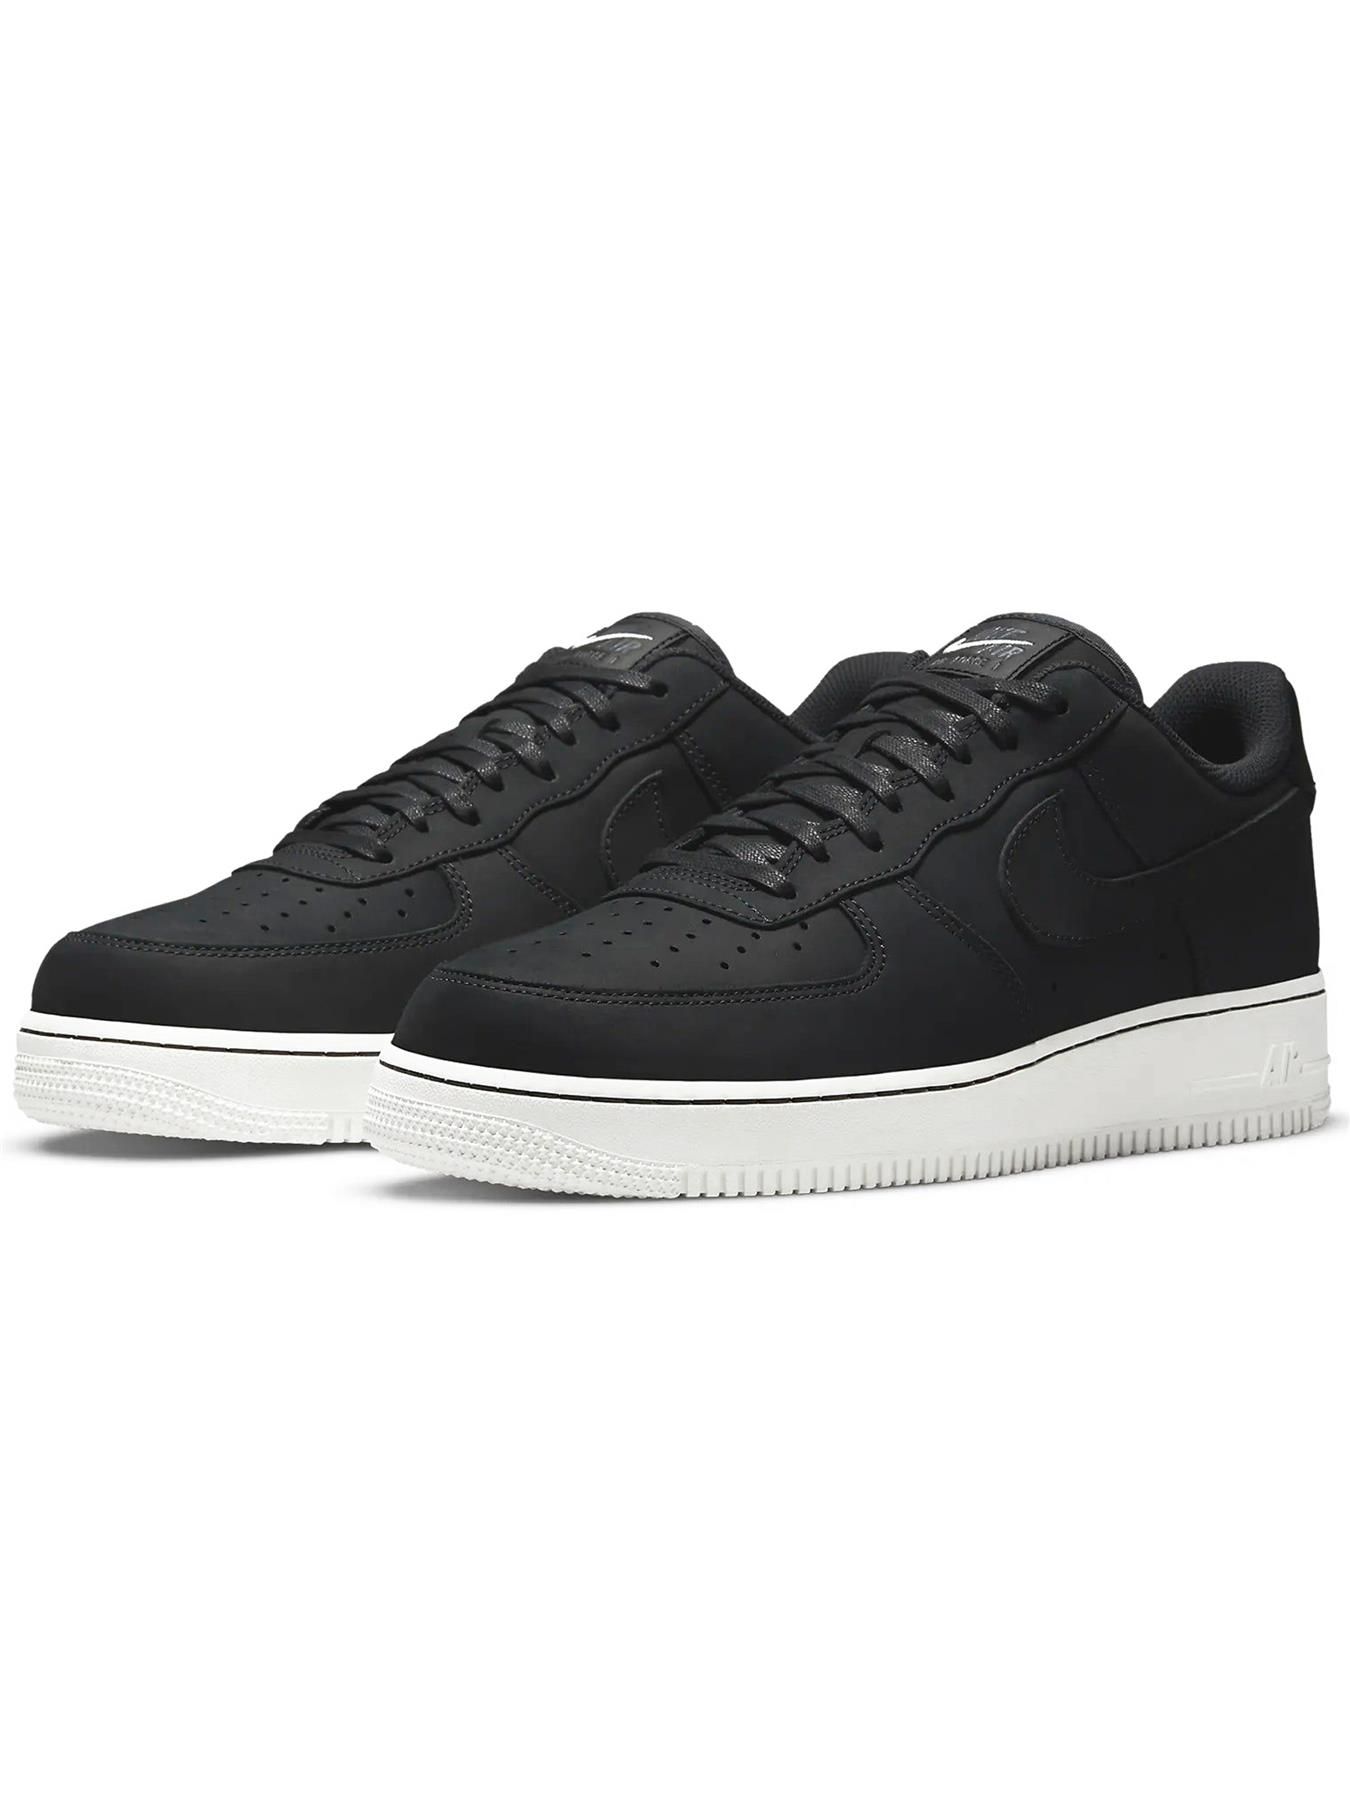 Refresh your Wardobe with these Nike Trainers, these Superb Trainers Features  Leather upper, a comfortable Synthetic lining And a Rubber Sole, These Trainers are Designed with Beautiful Logo, Perfect for Gym, Sports, Training and Walking, Good to use for Casual, workwear or any Outdoor event, these Trainers are very Lightweight and Comfortable.